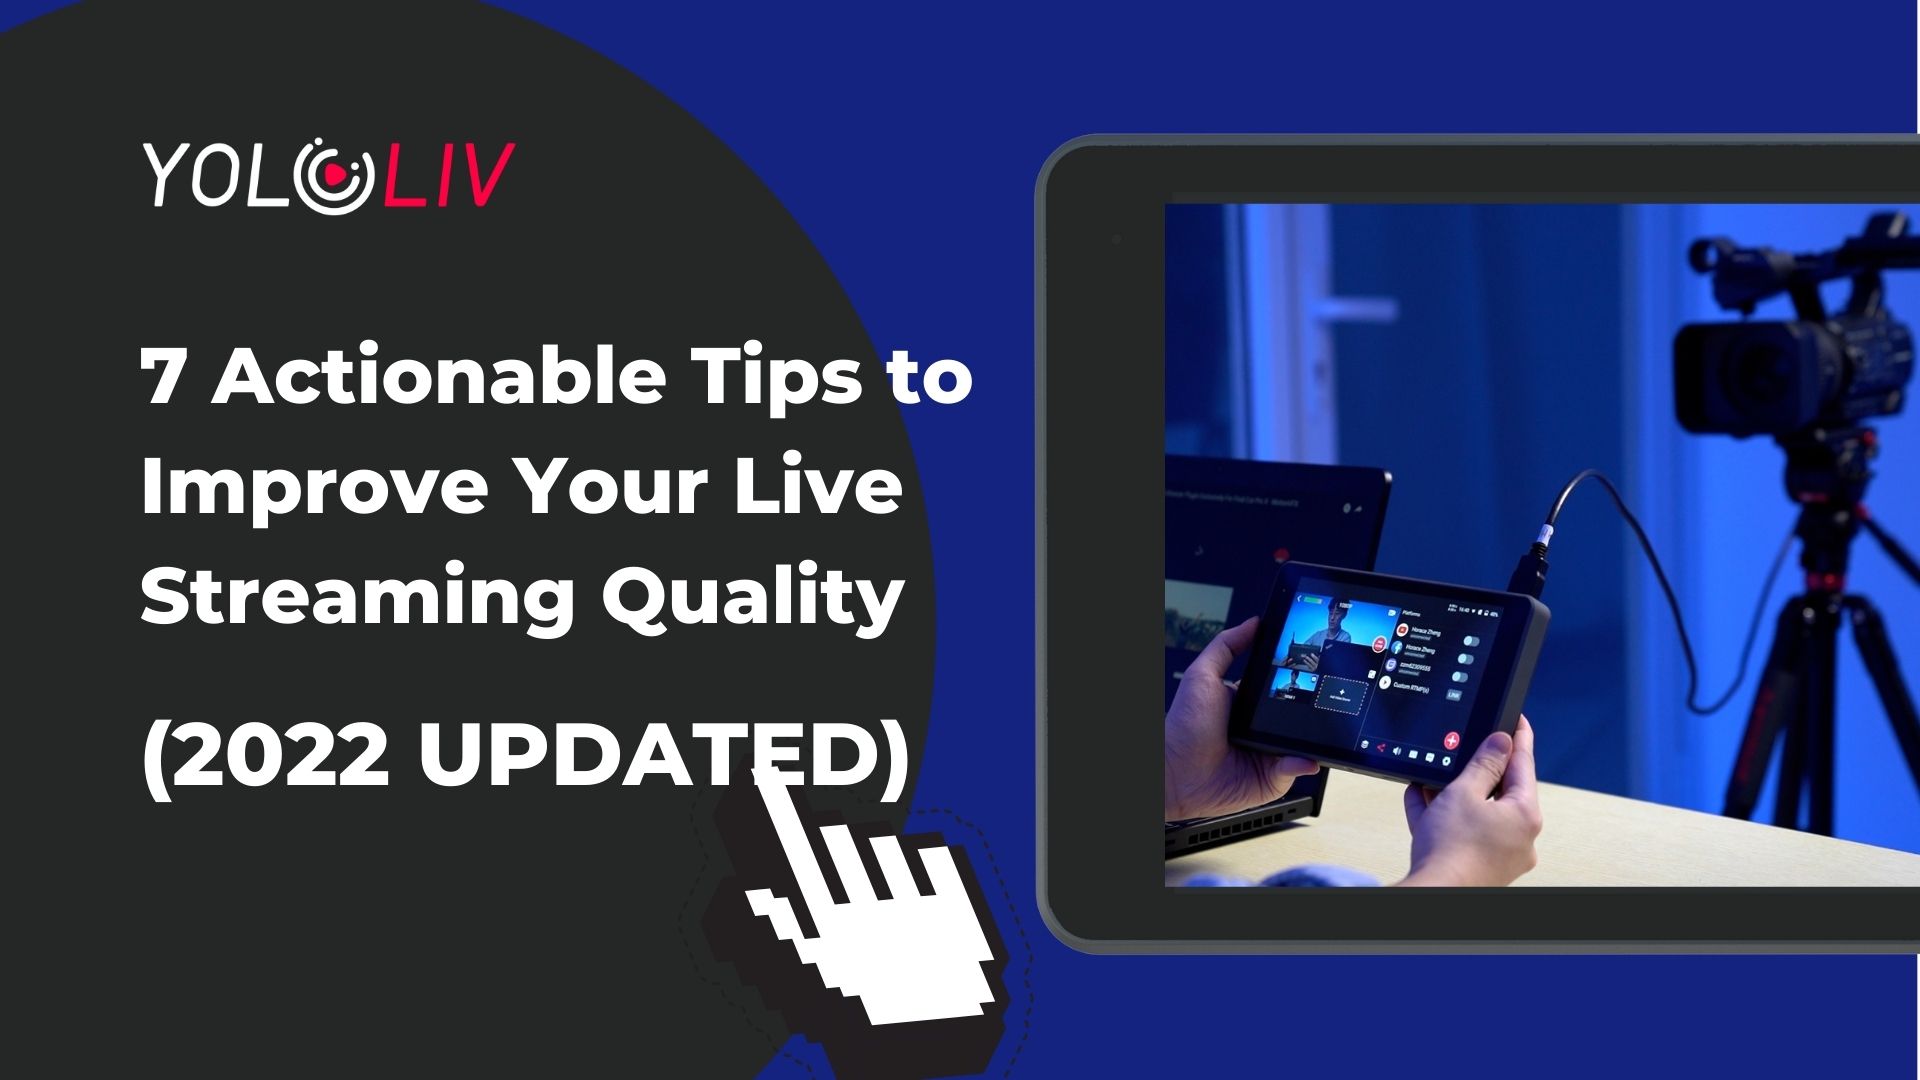 Stream Live Video Online: Top Solutions and Tips for Seamless